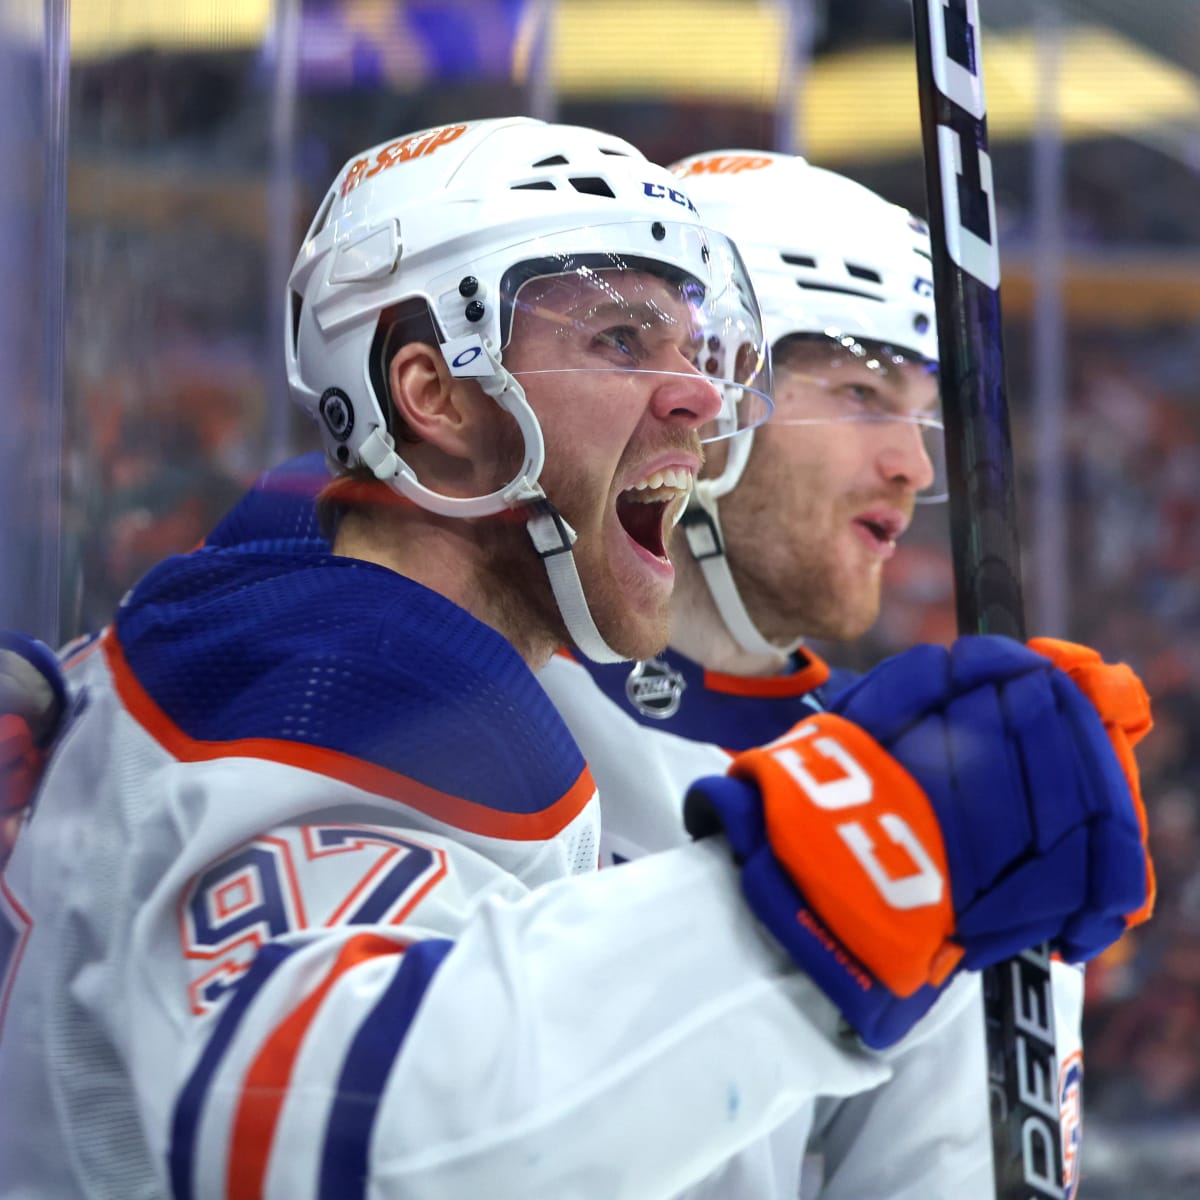 Connor McDavid is on track for one of the best NHL seasons of all time